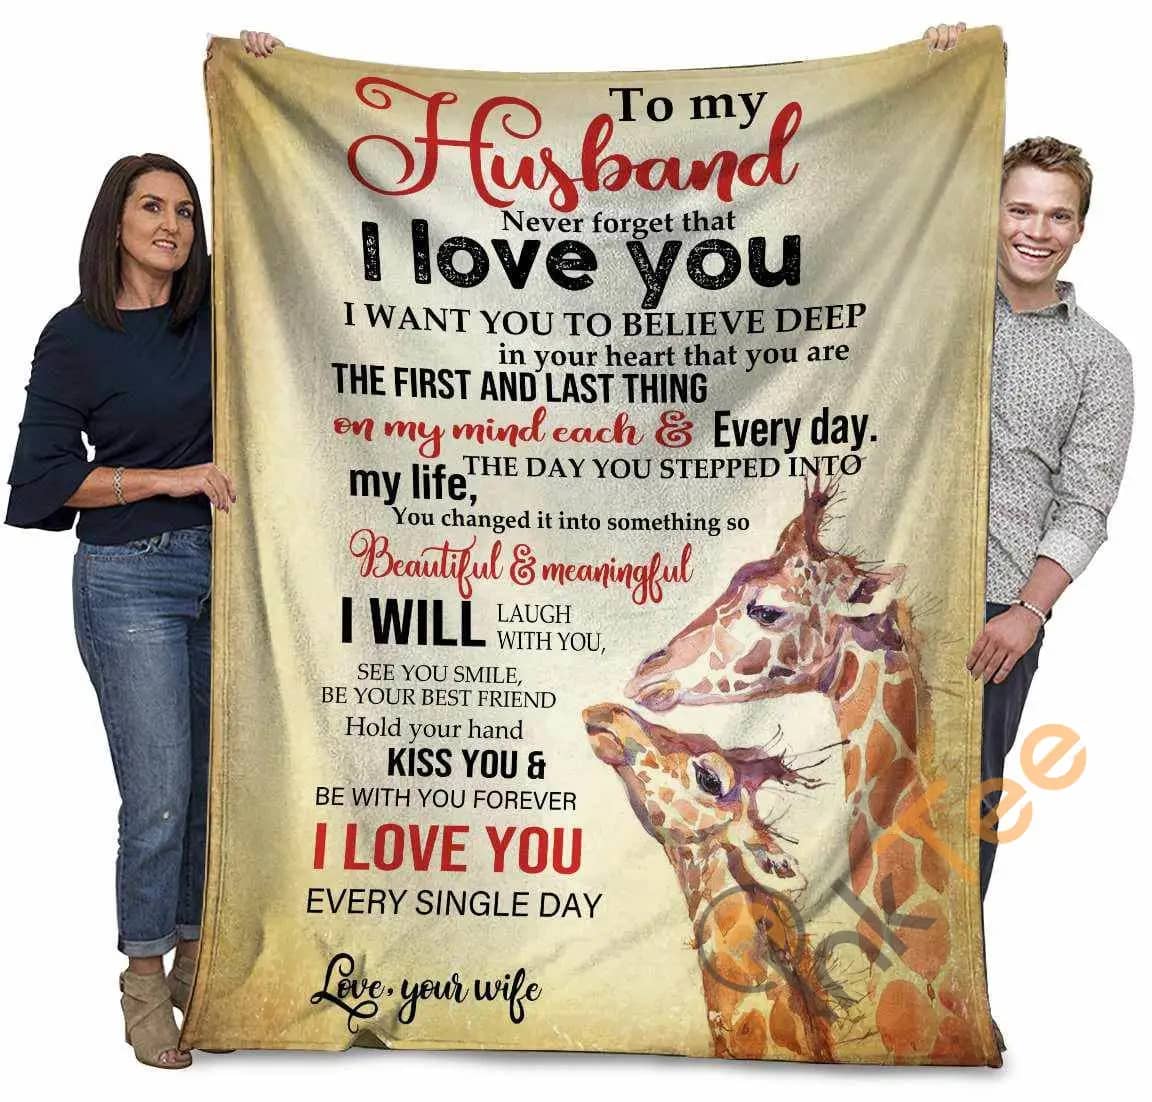 Wife To My Husband Never Forget That I Love You African Animals Giraffe Ultra Soft Cozy Plush Fleece Blanket